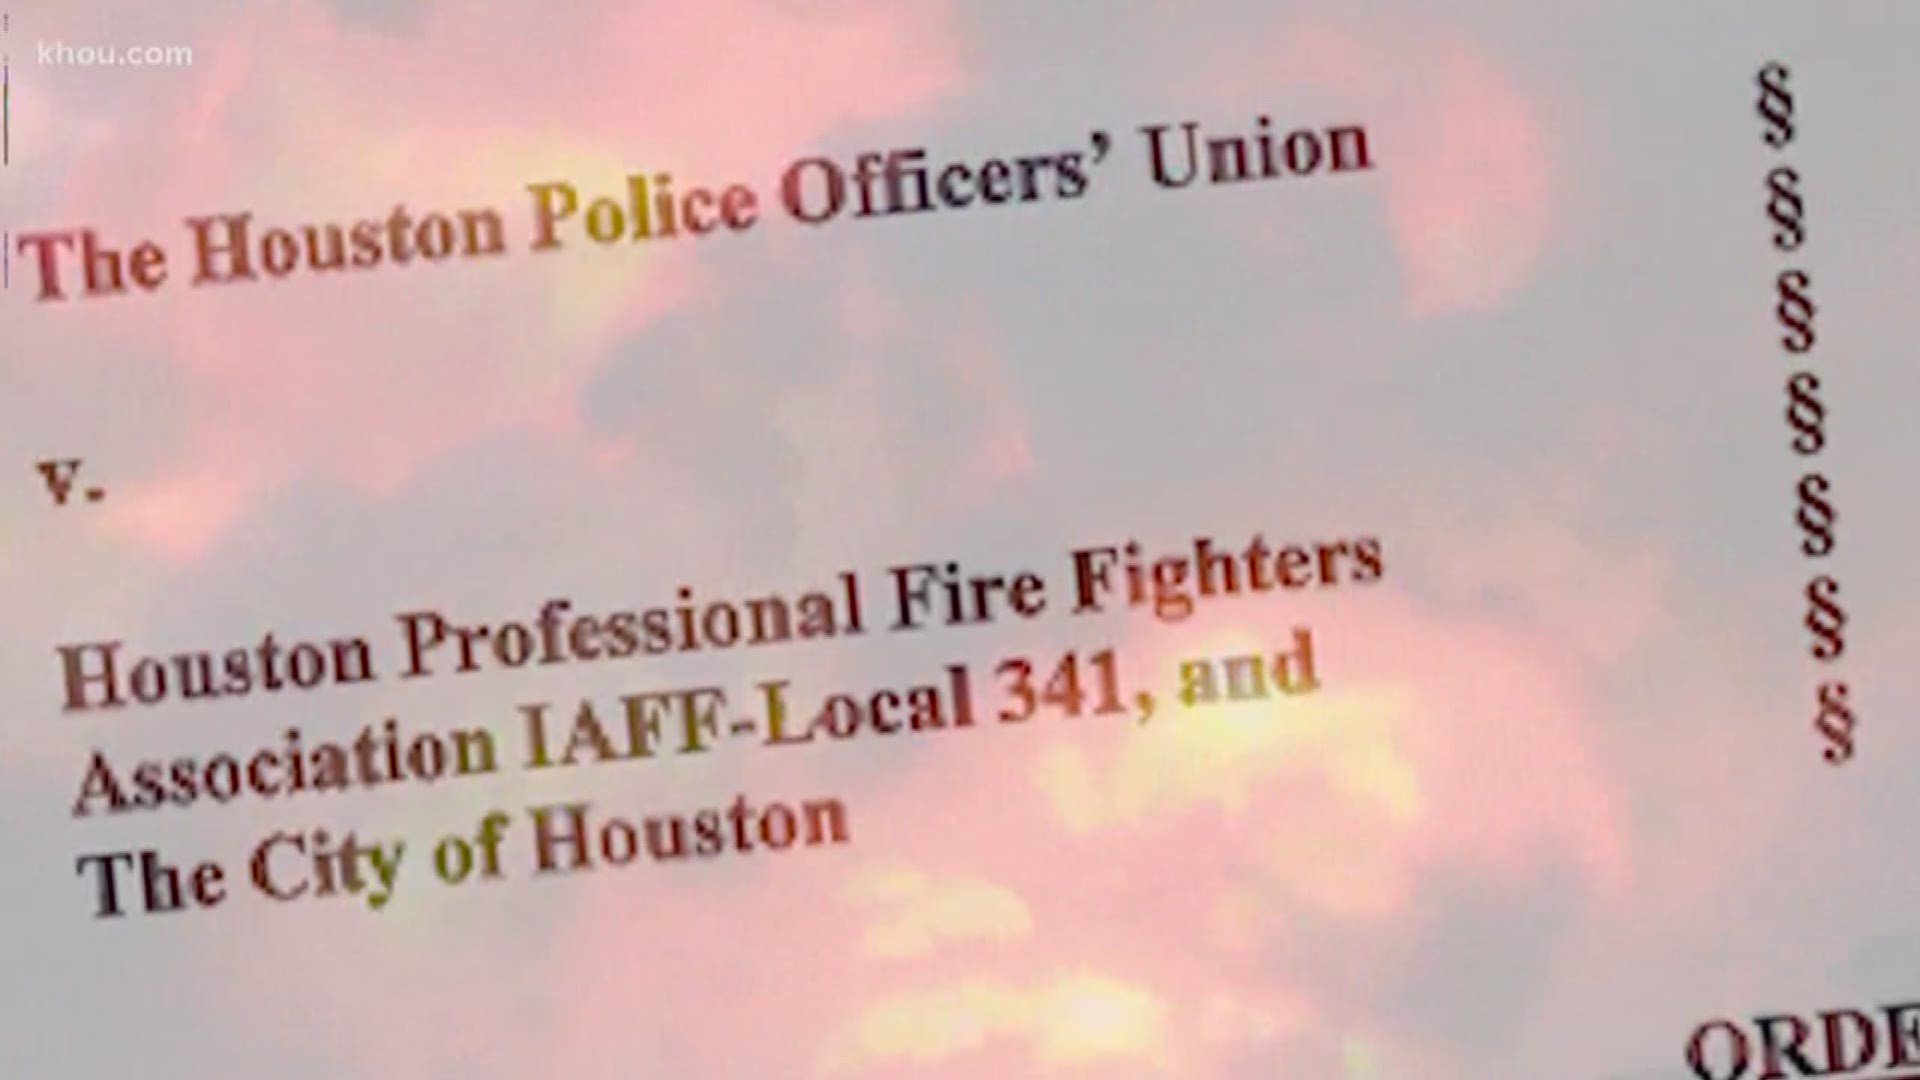 Houston firefighters are applauding after a judge ruled they are entitled to a huge pay raise.